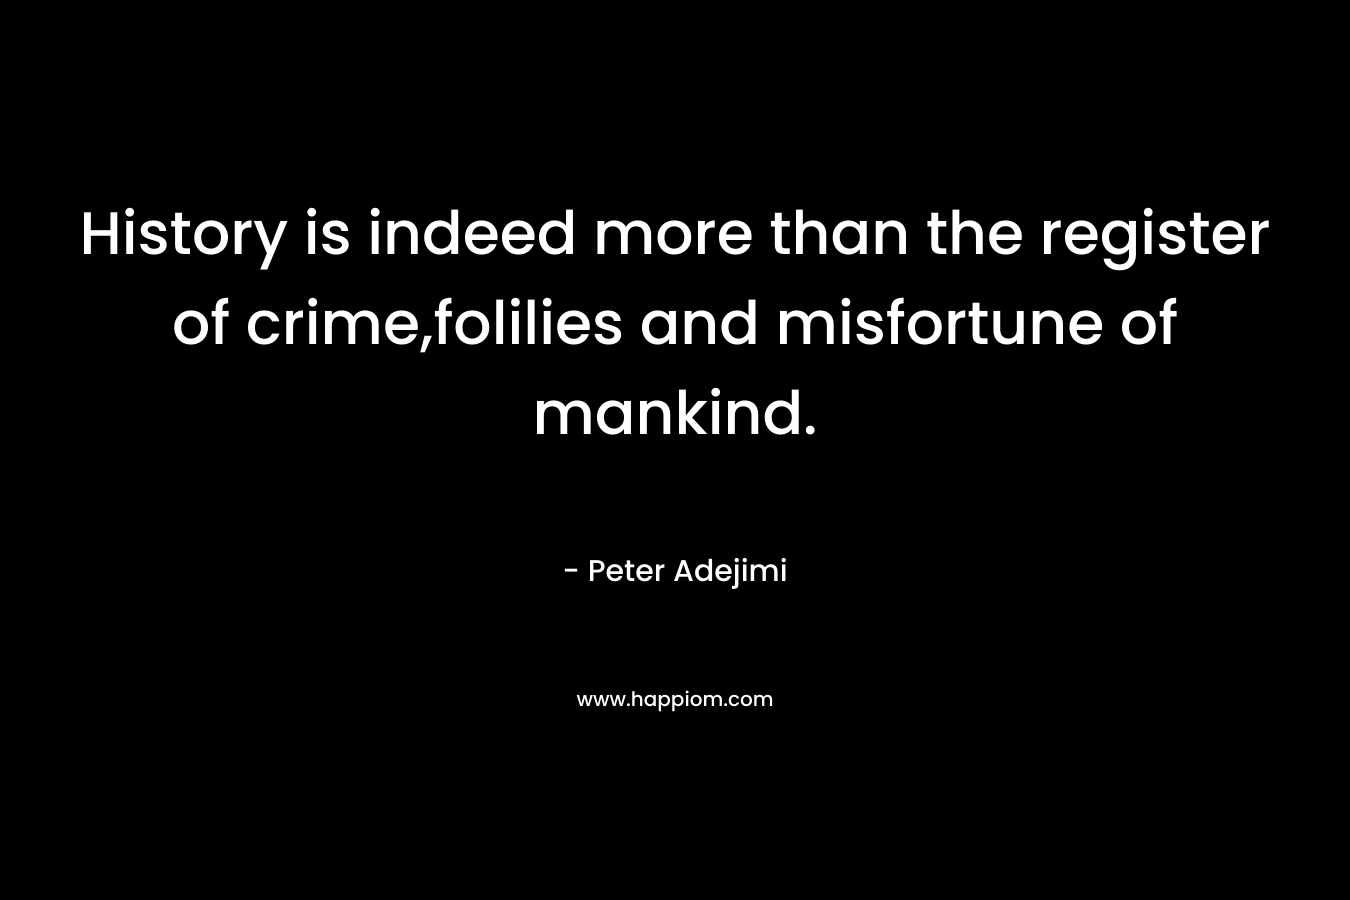 History is indeed more than the register of crime,folilies and misfortune of mankind. – Peter Adejimi